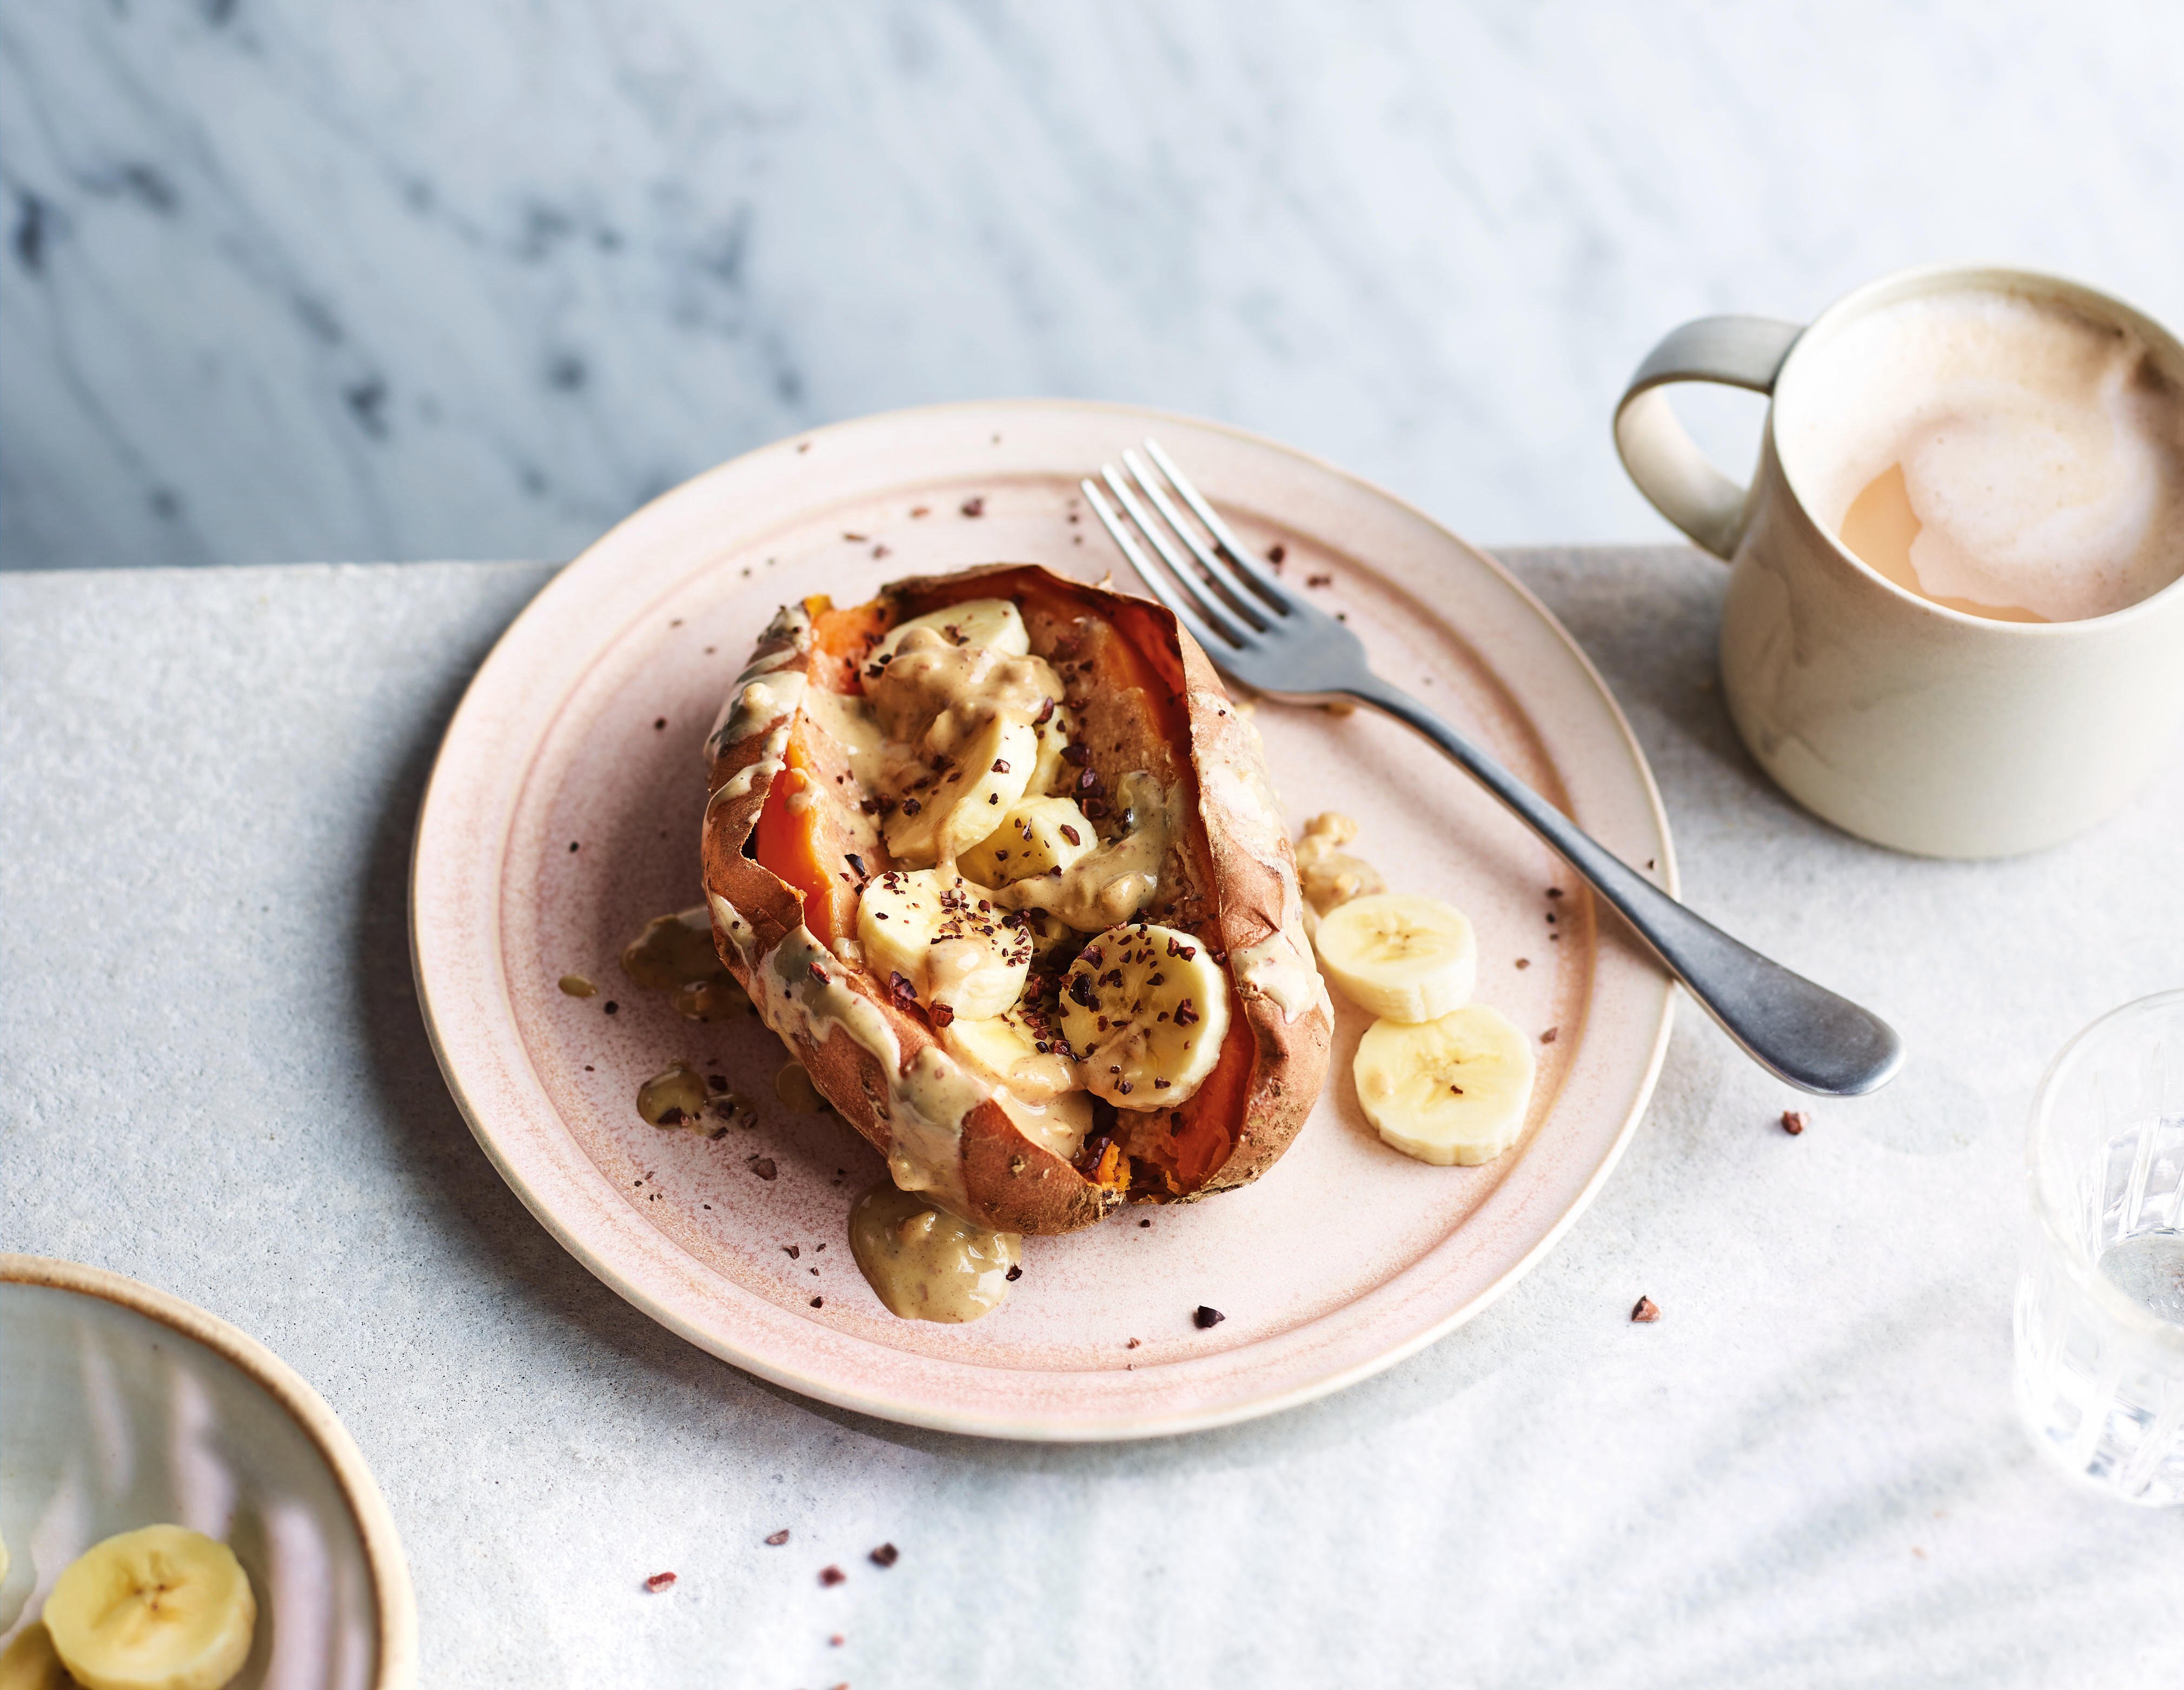 Sweet Potato with peanut butter and bananas